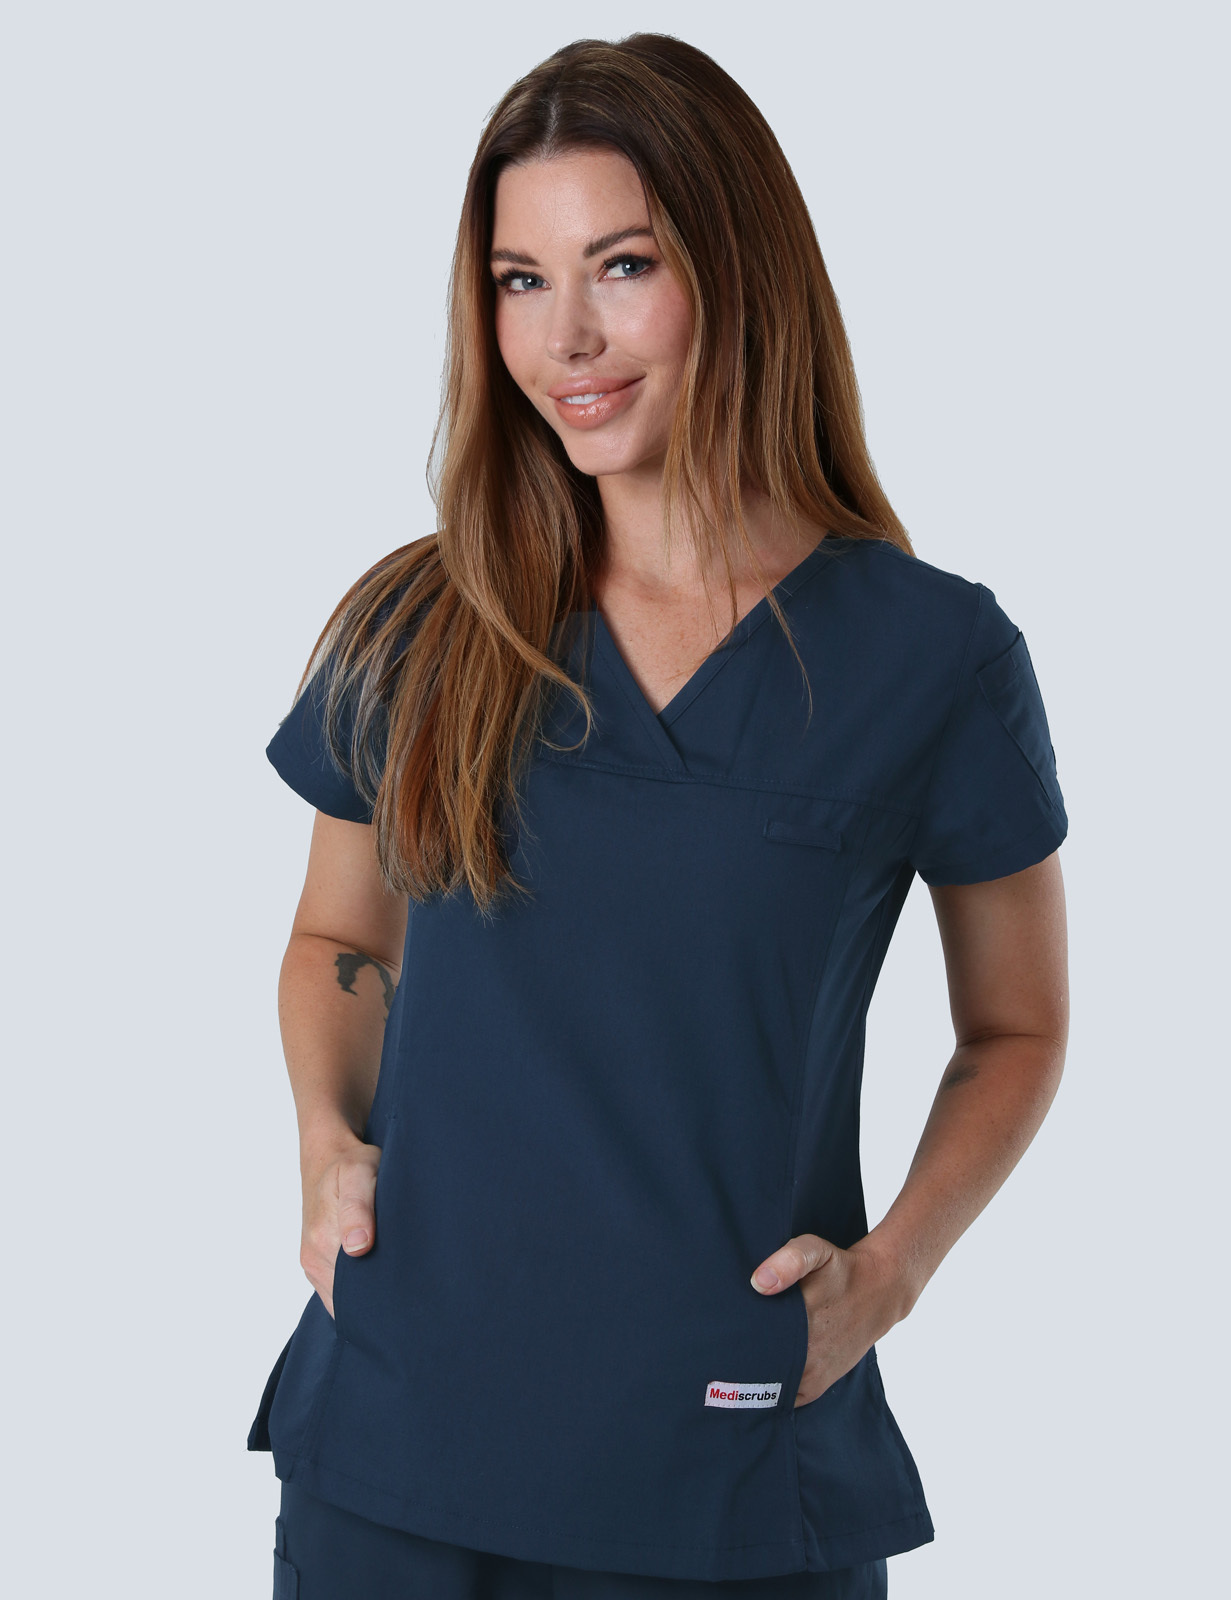 Rockhampton Base Hospital - Surgical Unit (Women's Fit Solid Scrub Top and Cargo Pants in Navy incl Logos)